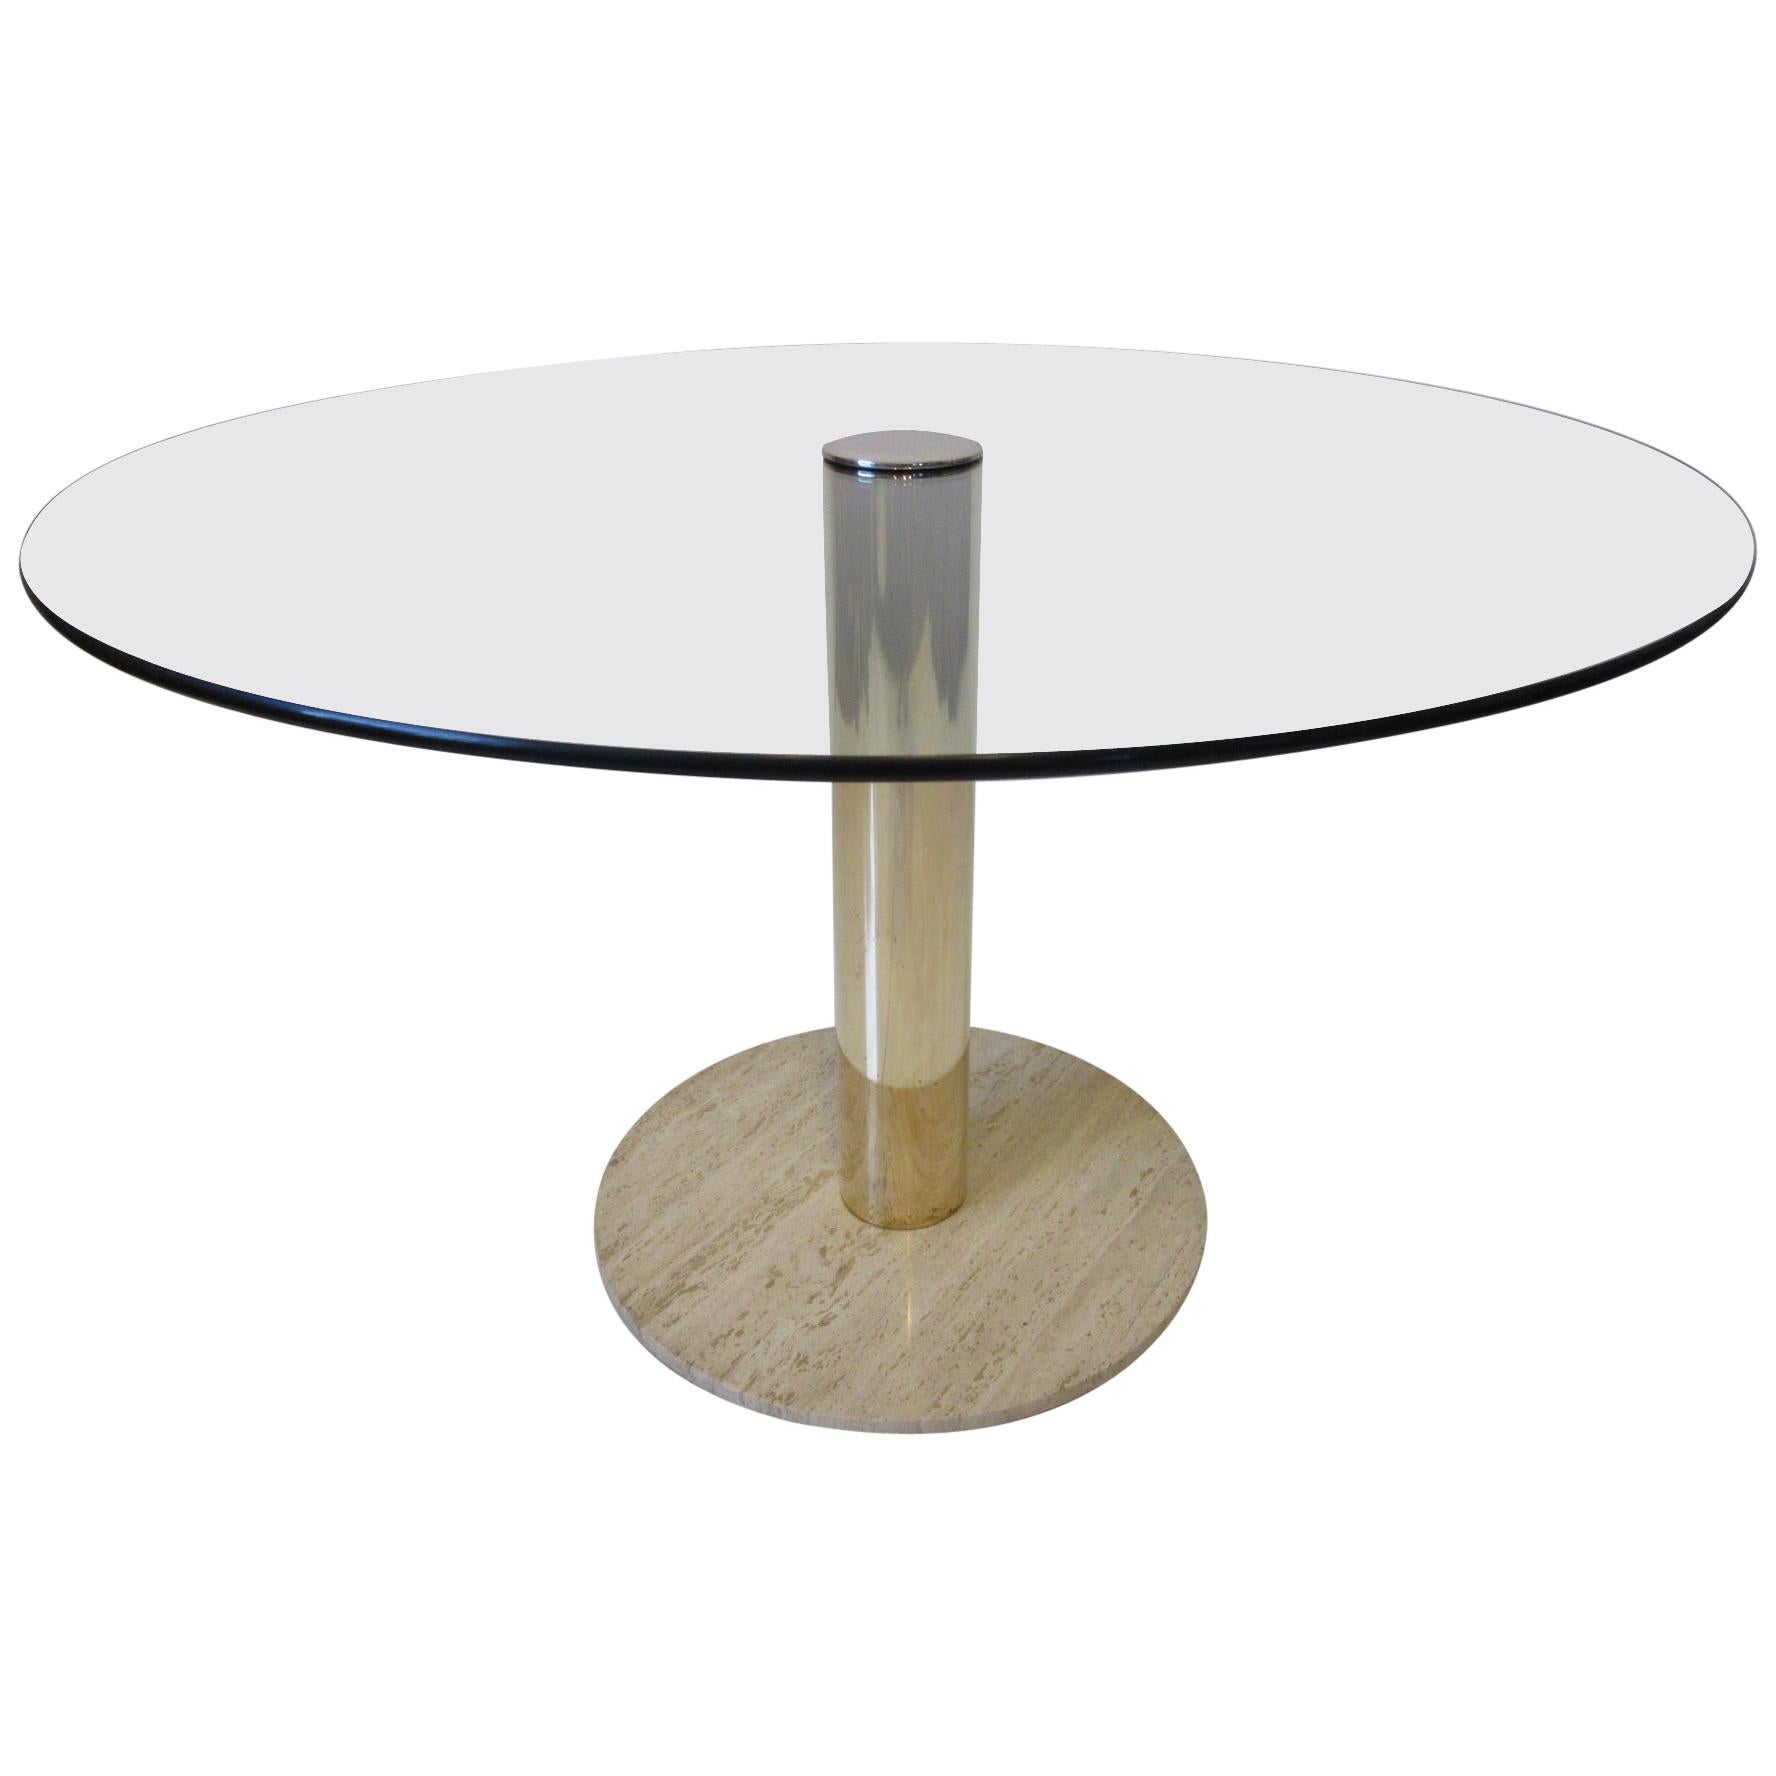 Pace Brass / Glass / Marble Italian Styled Dining Table